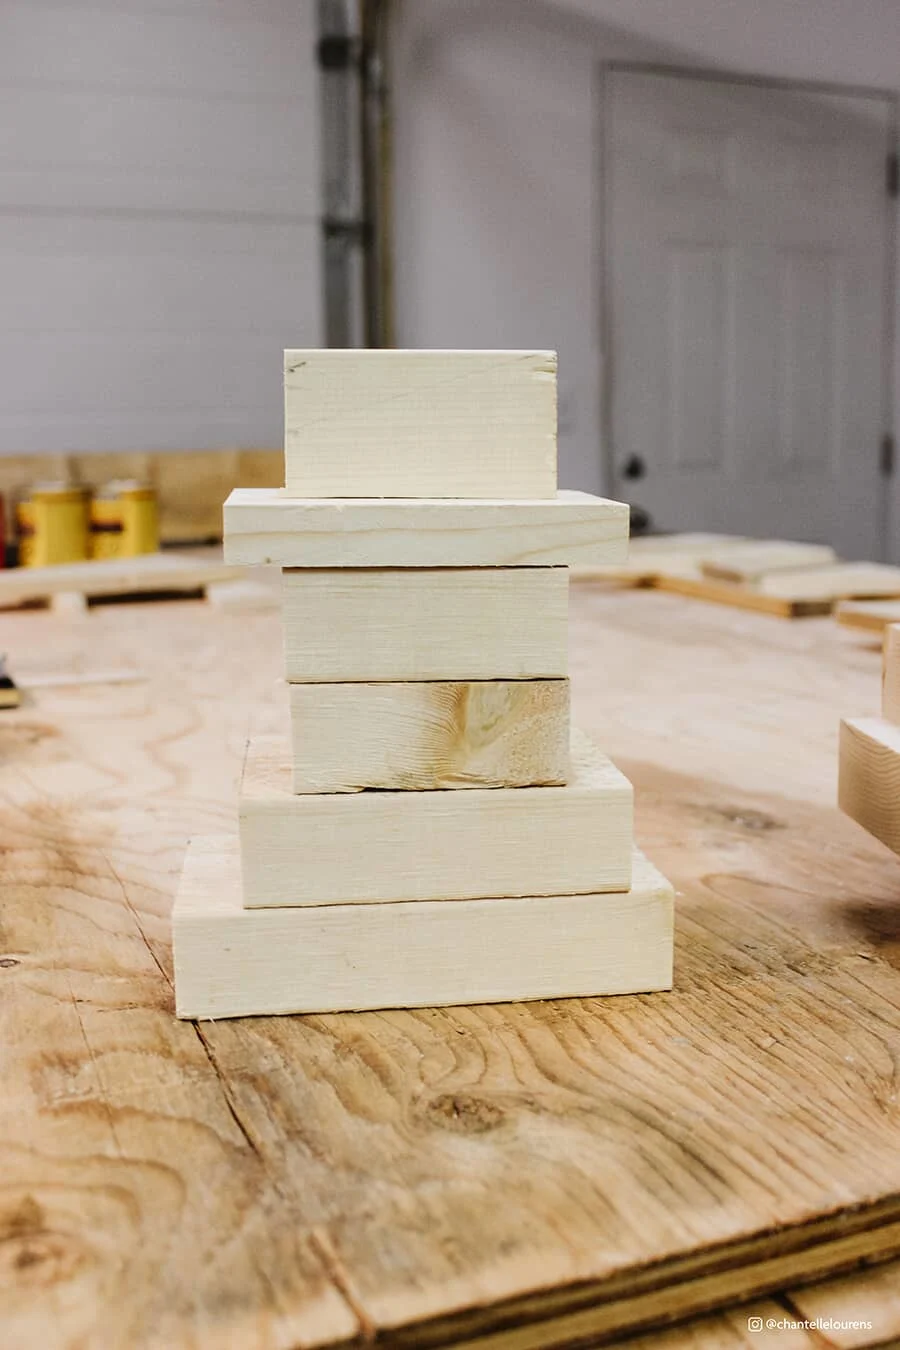 Stacked wooden blocks